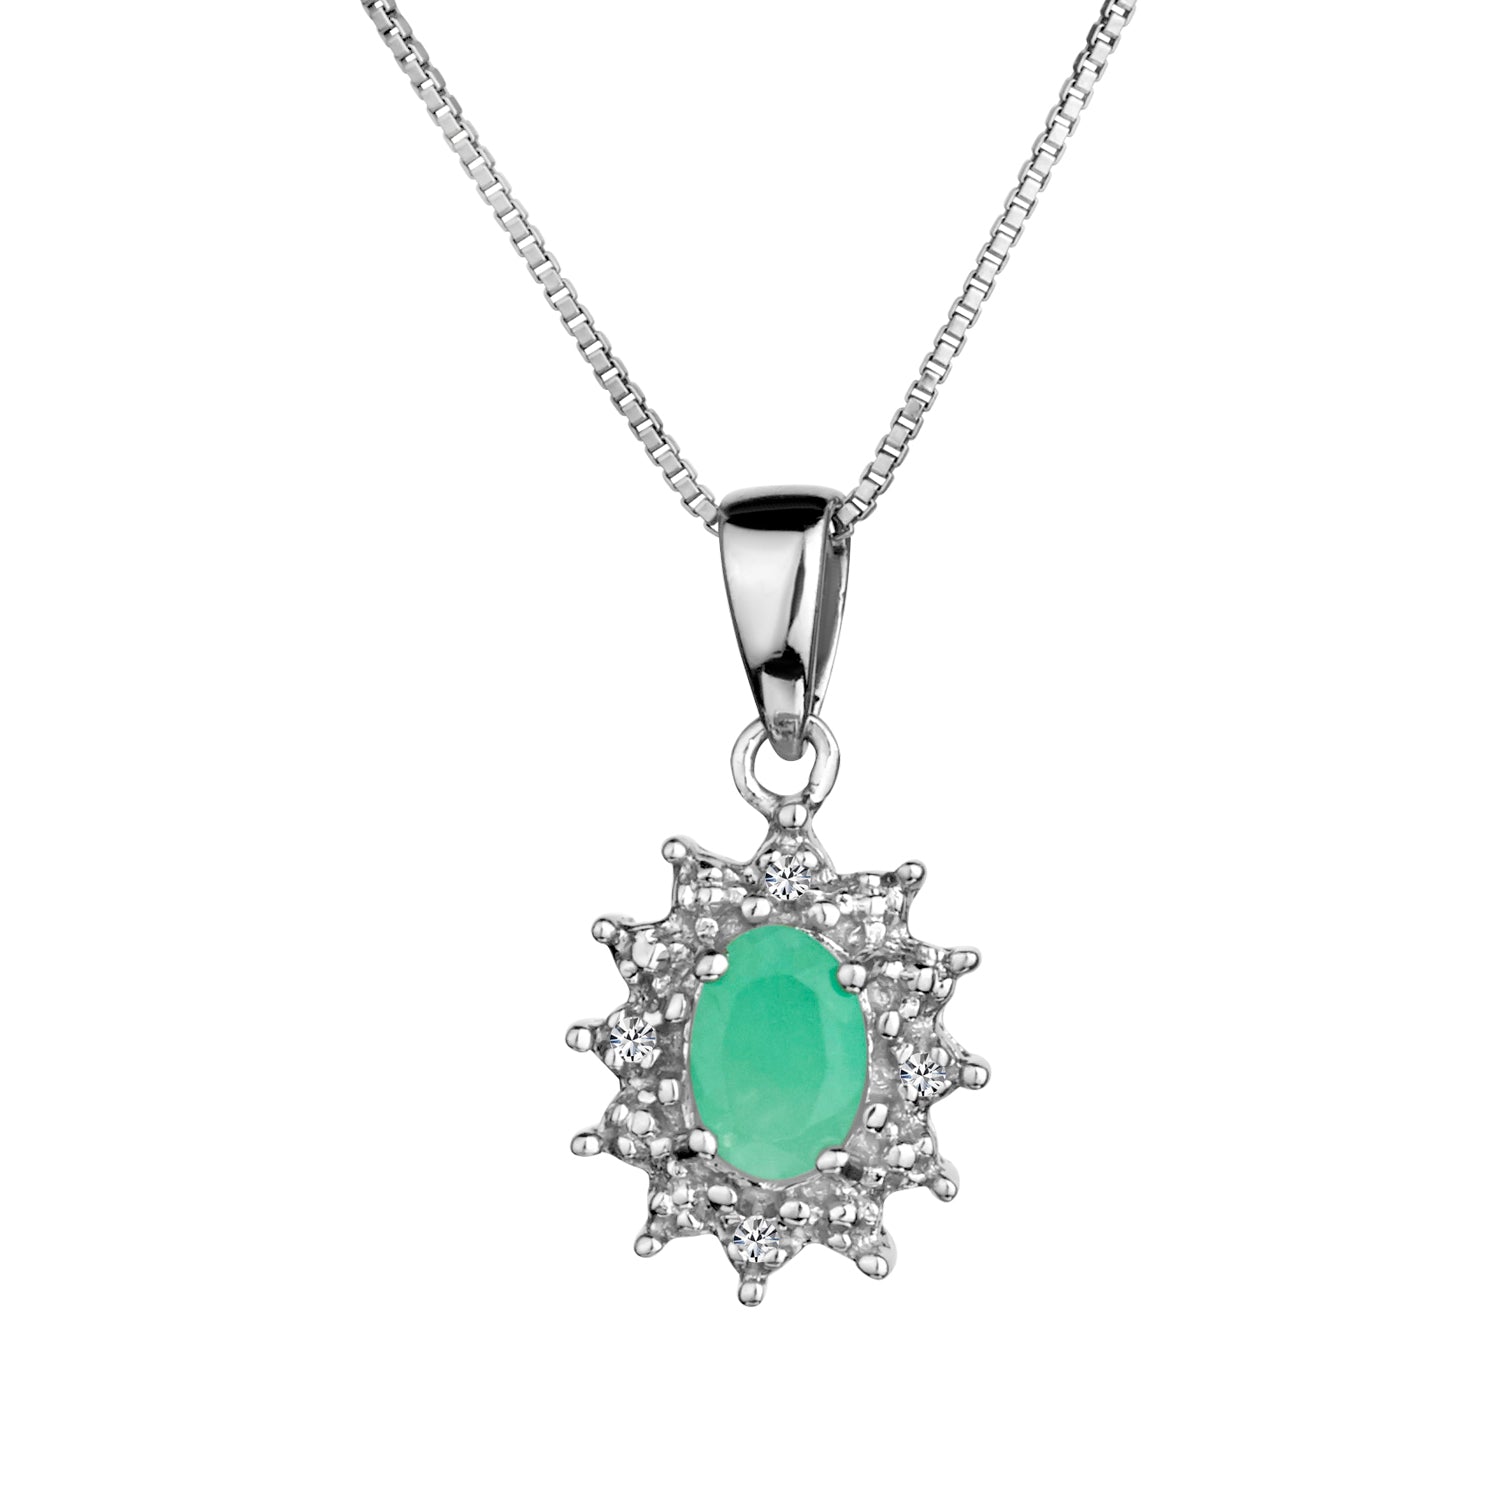 Genuine Emerald Diamond Pendant,  Sterling Silver. Necklaces and Pendants. Griffin Jewellery Designs. 